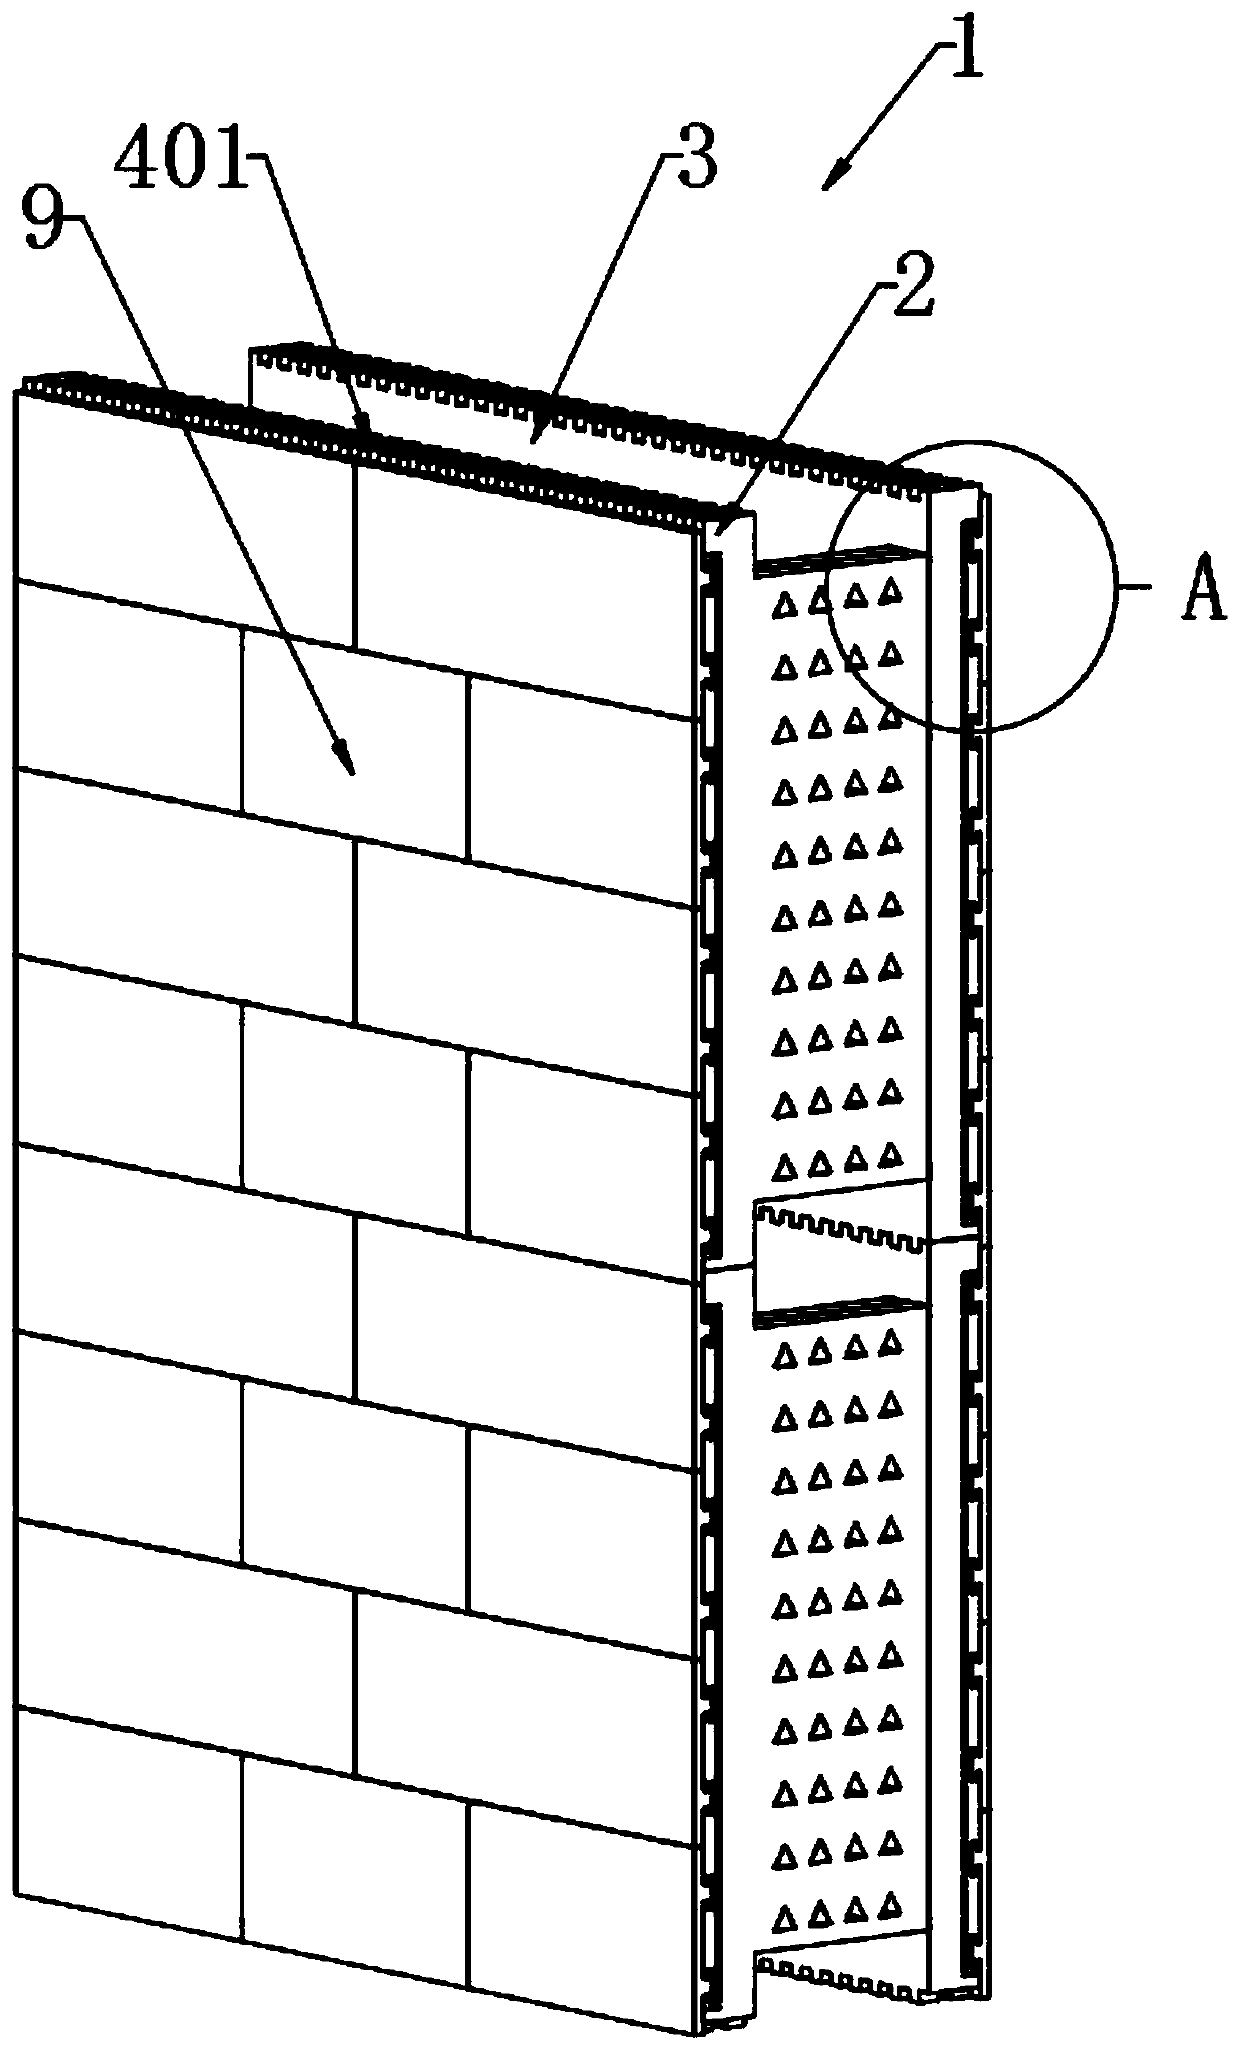 Assembled compound exterior wallboard structure of building